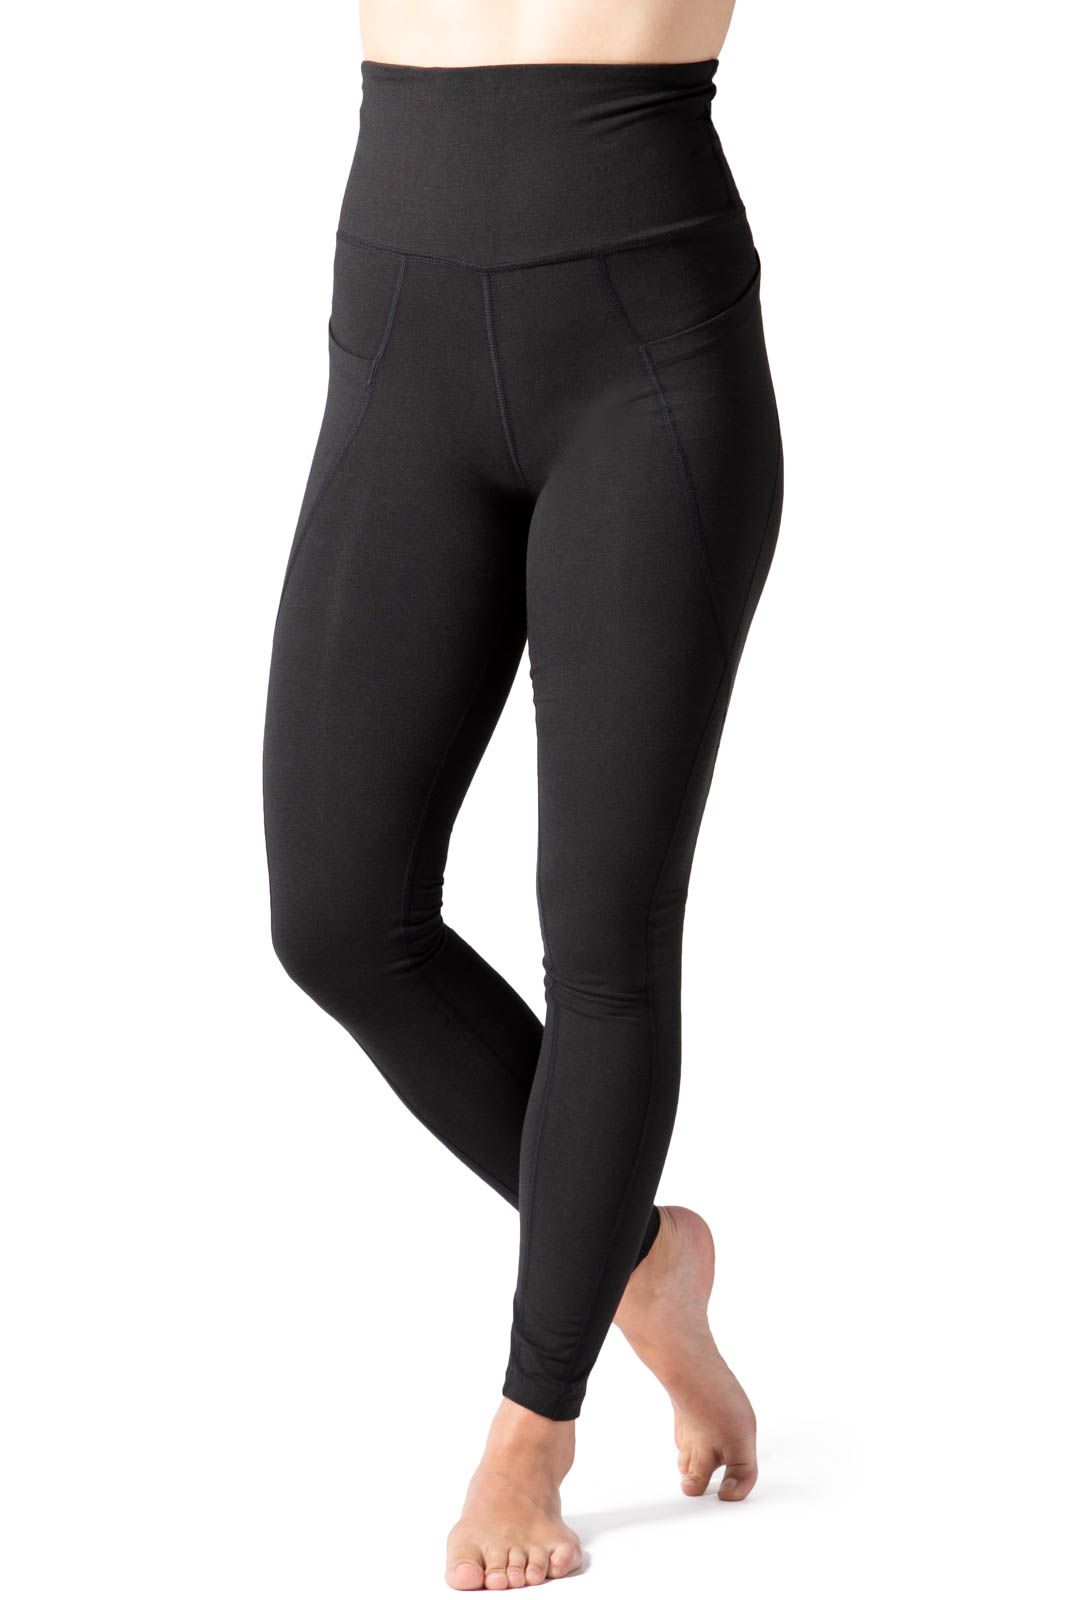 Up To 75% Off on LESIES Women's Active Capri Y... | Groupon Goods